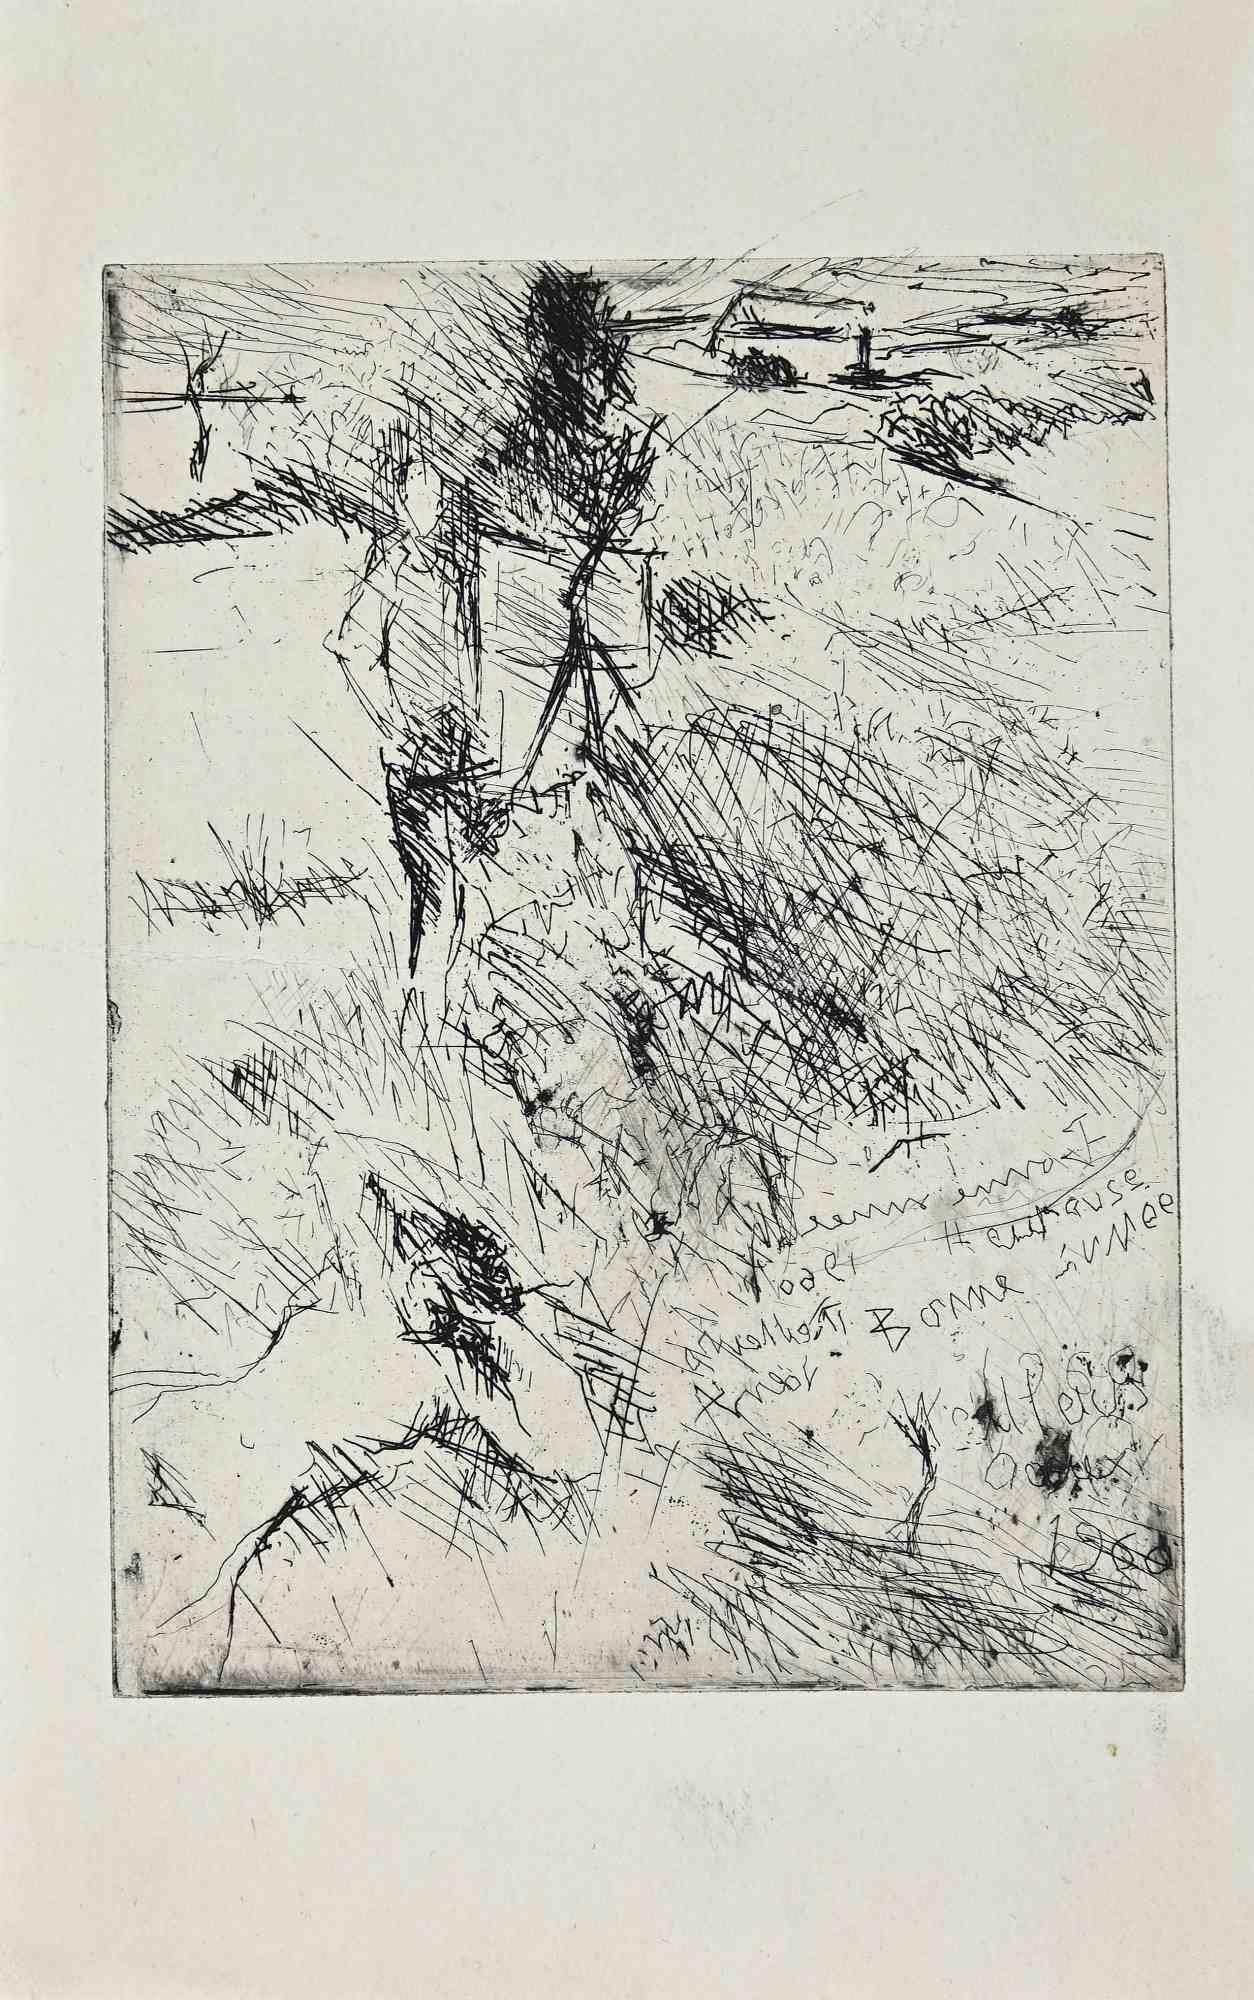 Unknown Figurative Print - Painter in the Fields with his Model - Original Etching - 1960